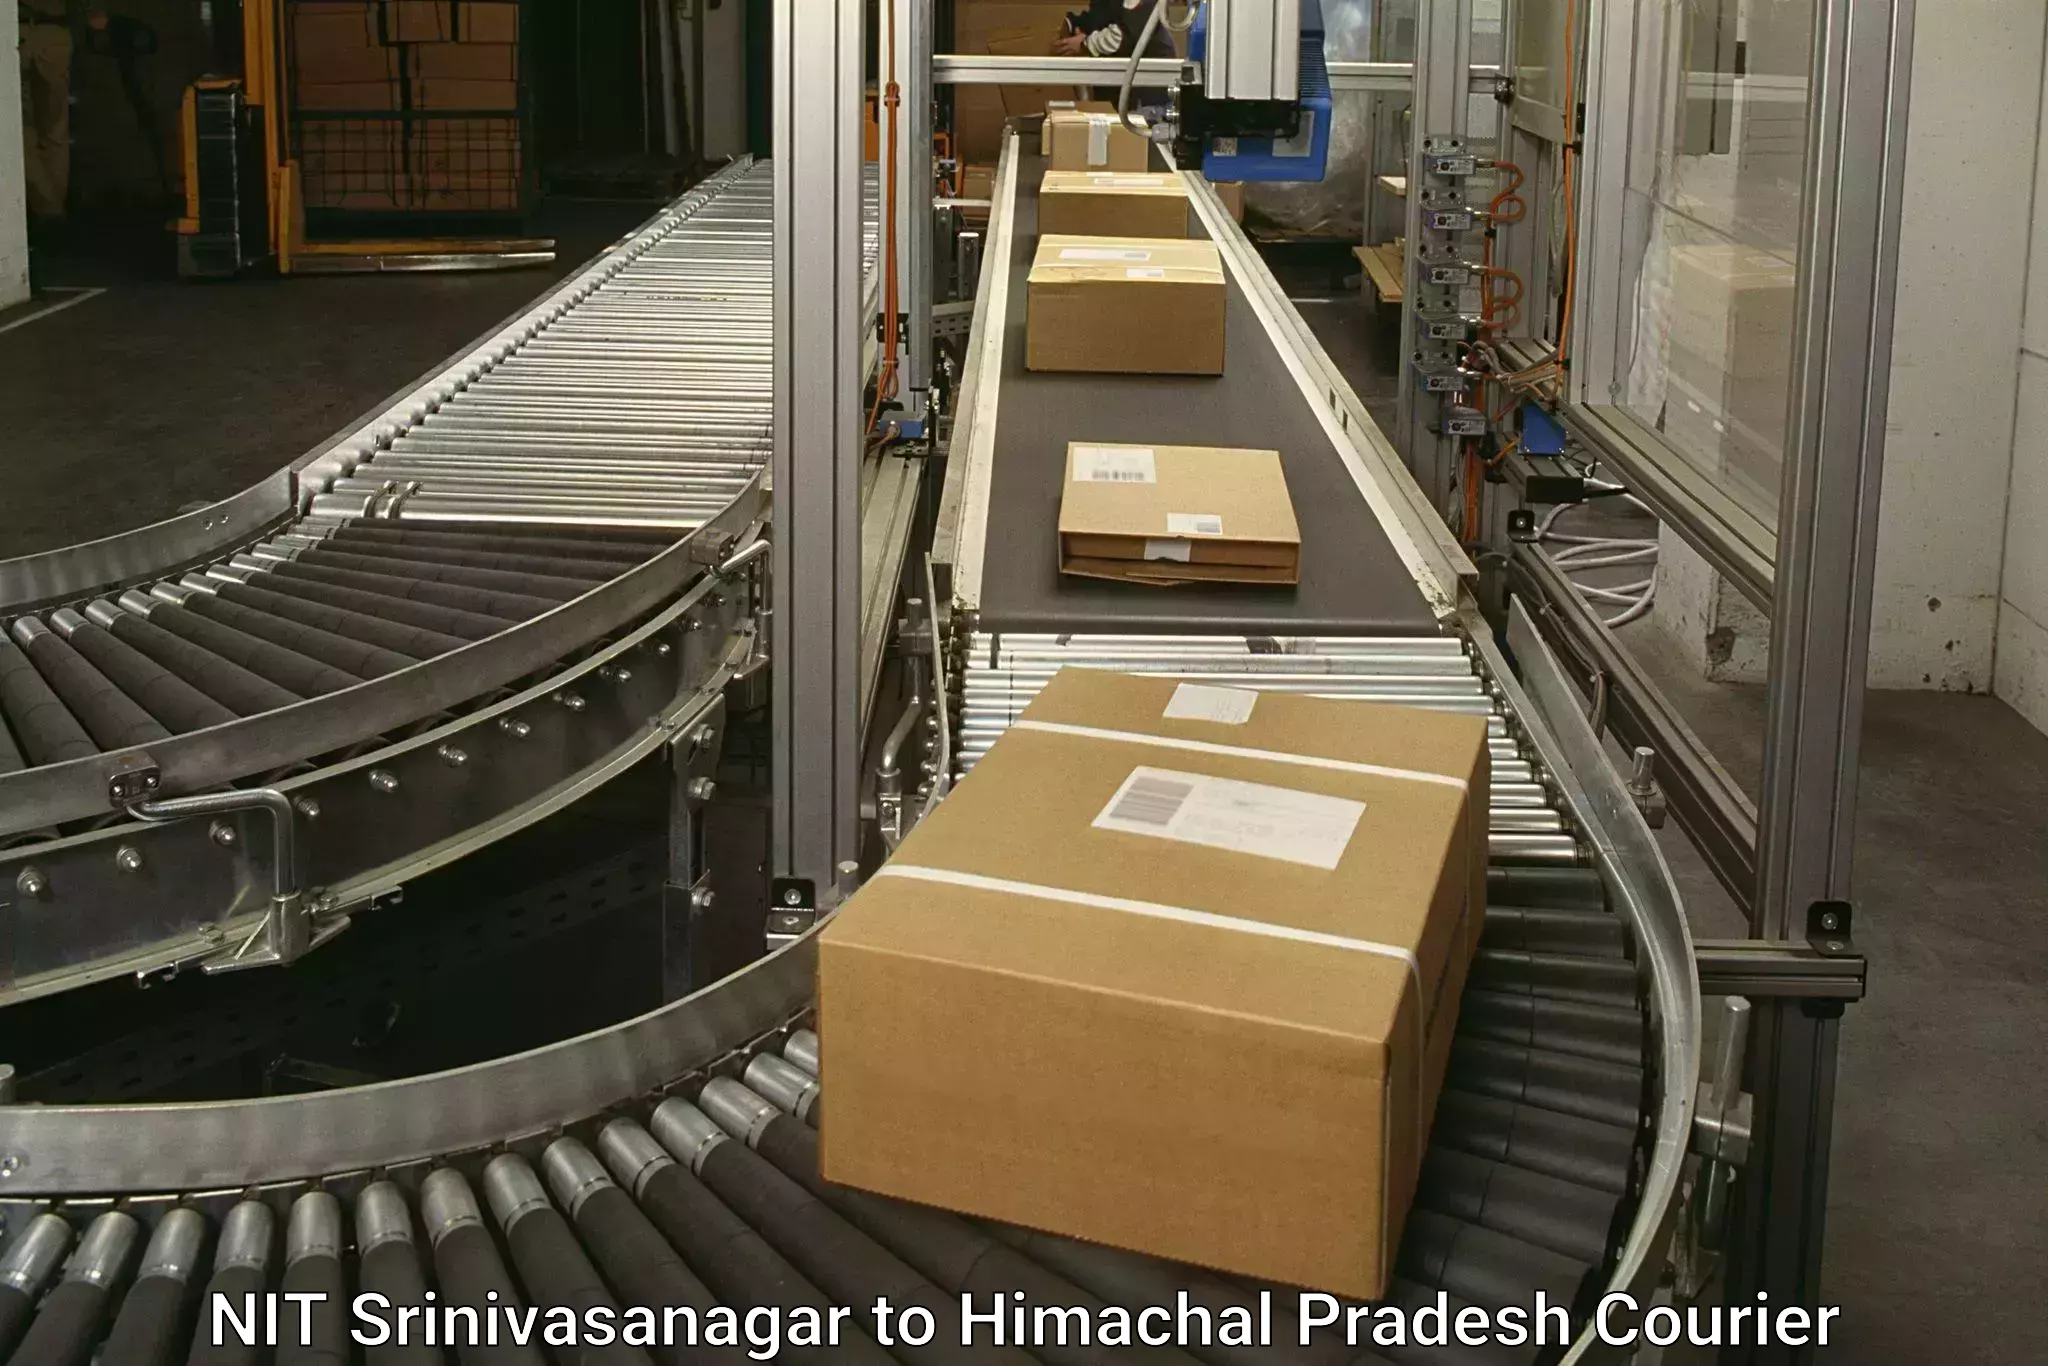 Custom courier packages NIT Srinivasanagar to YS Parmar University of Horticulture and Forestry Solan